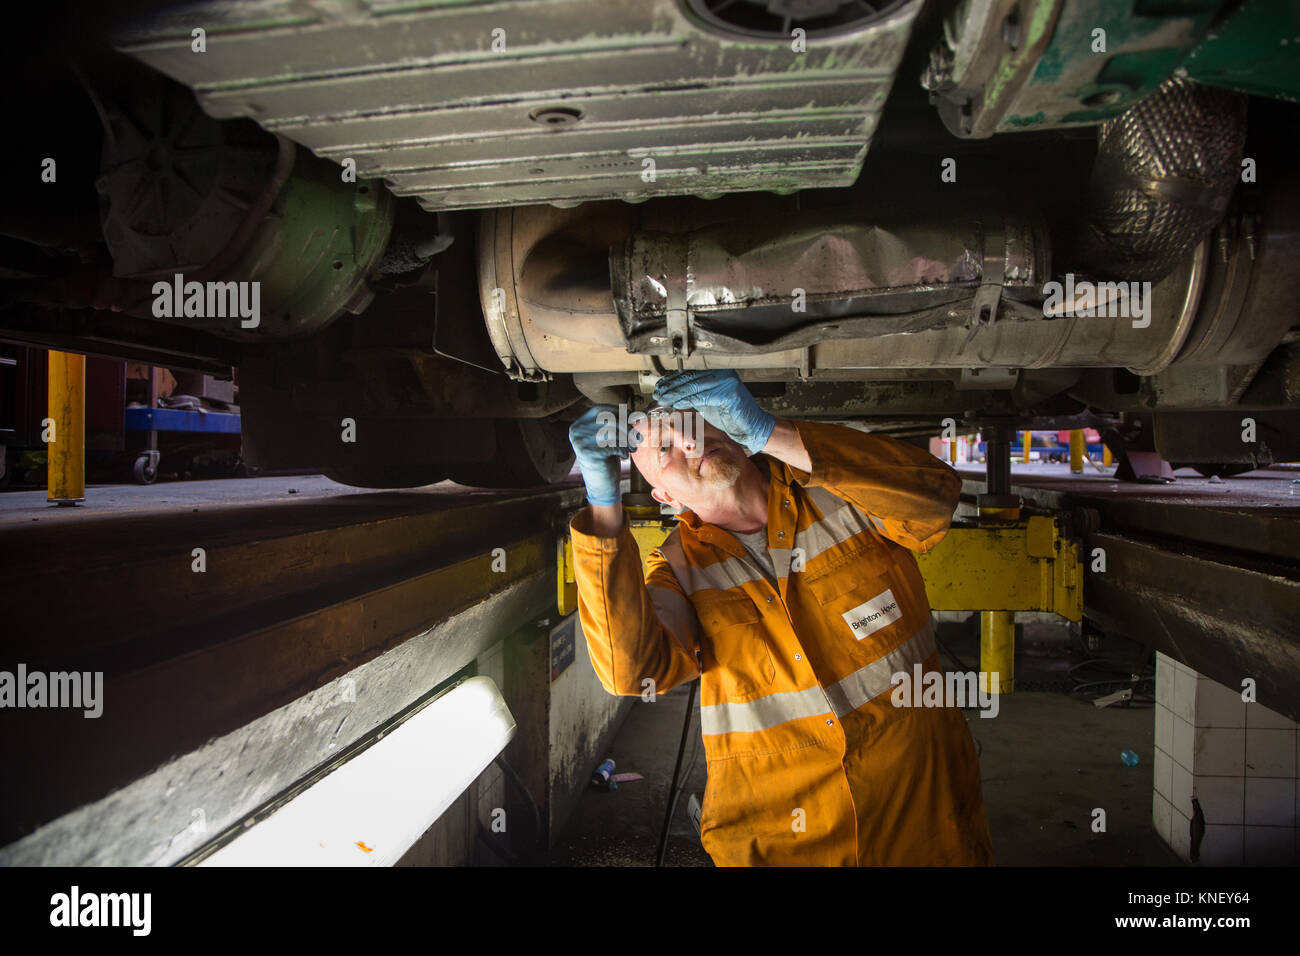 A mechanic working on the engine of a bus from underneath, at the Brighton and Hove Bus Depot Stock Photo